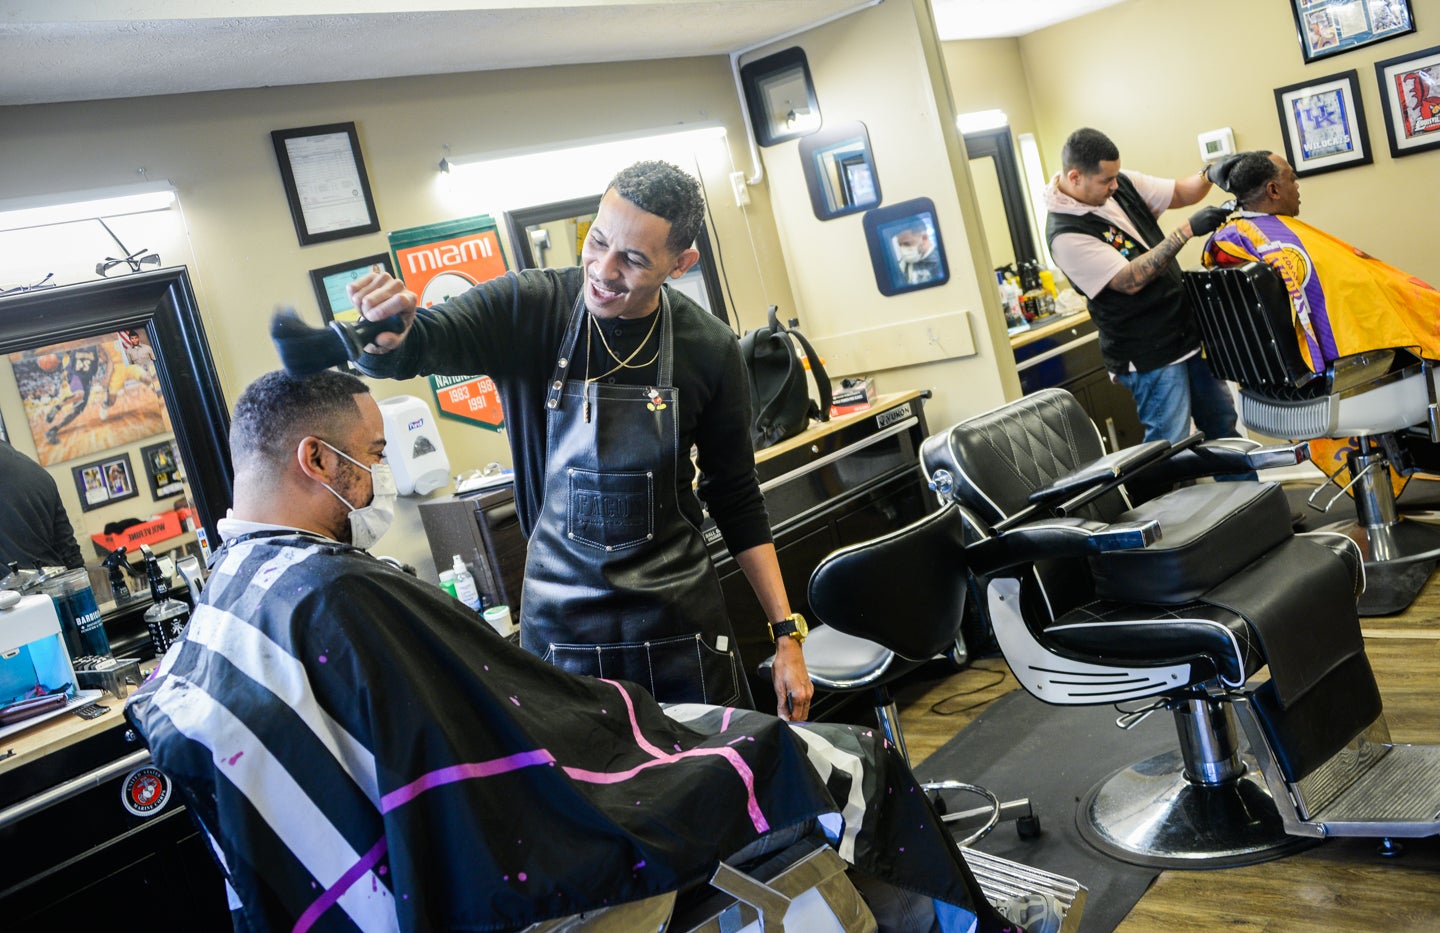 Cutting his own path: Barber Moe Shands living his best life, inspiring others to do the same